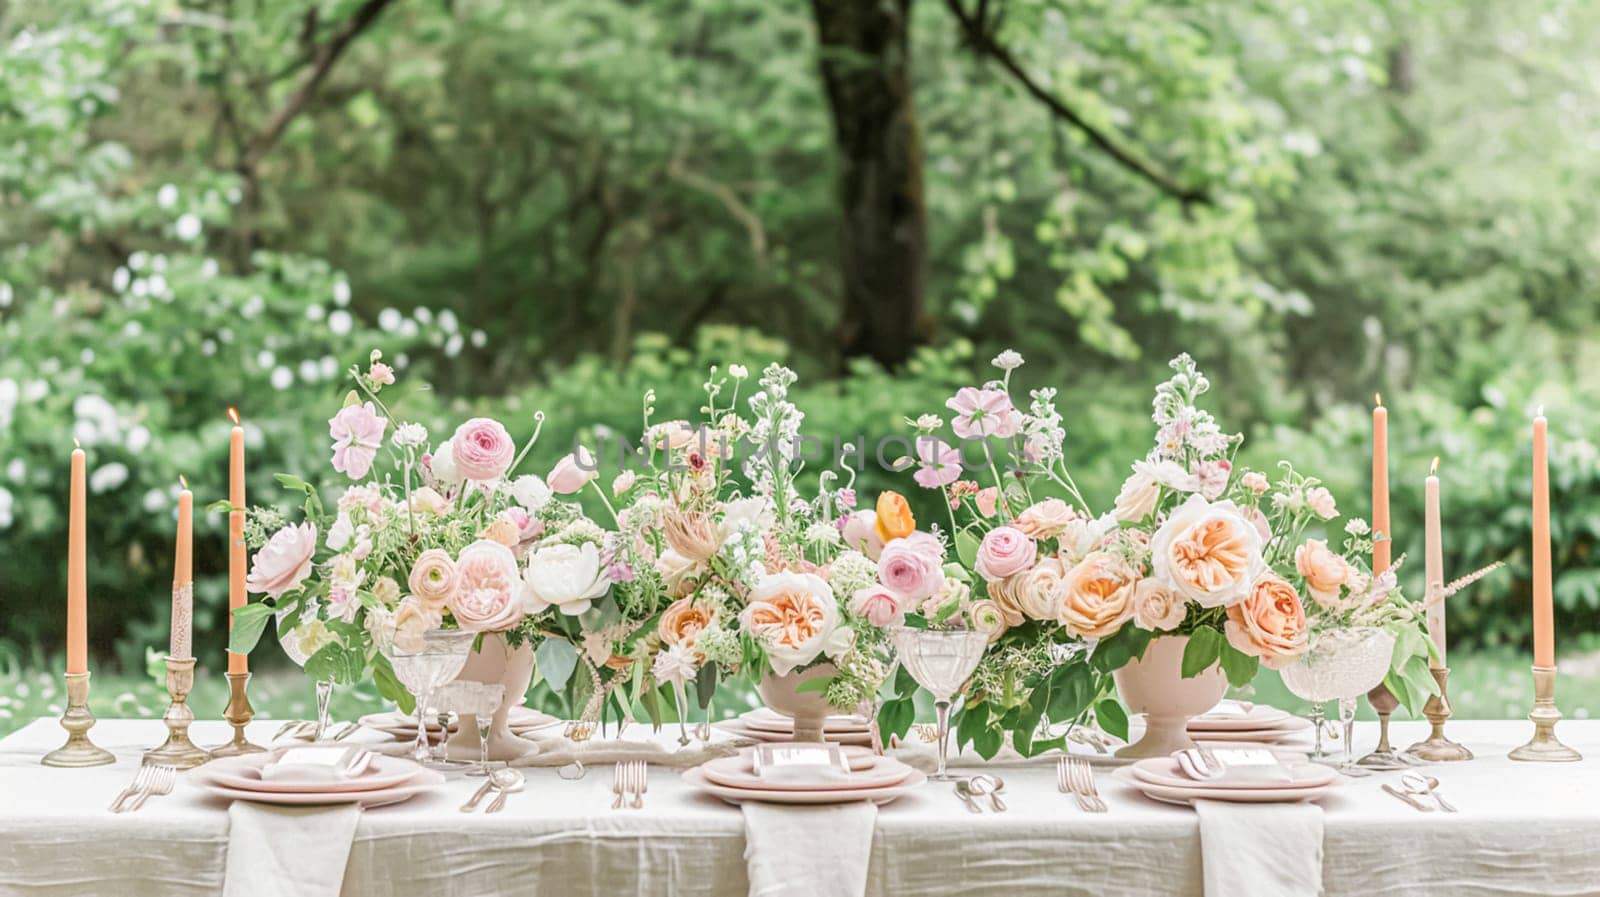 Garden party tablescape, elegance with floral table decor by Anneleven